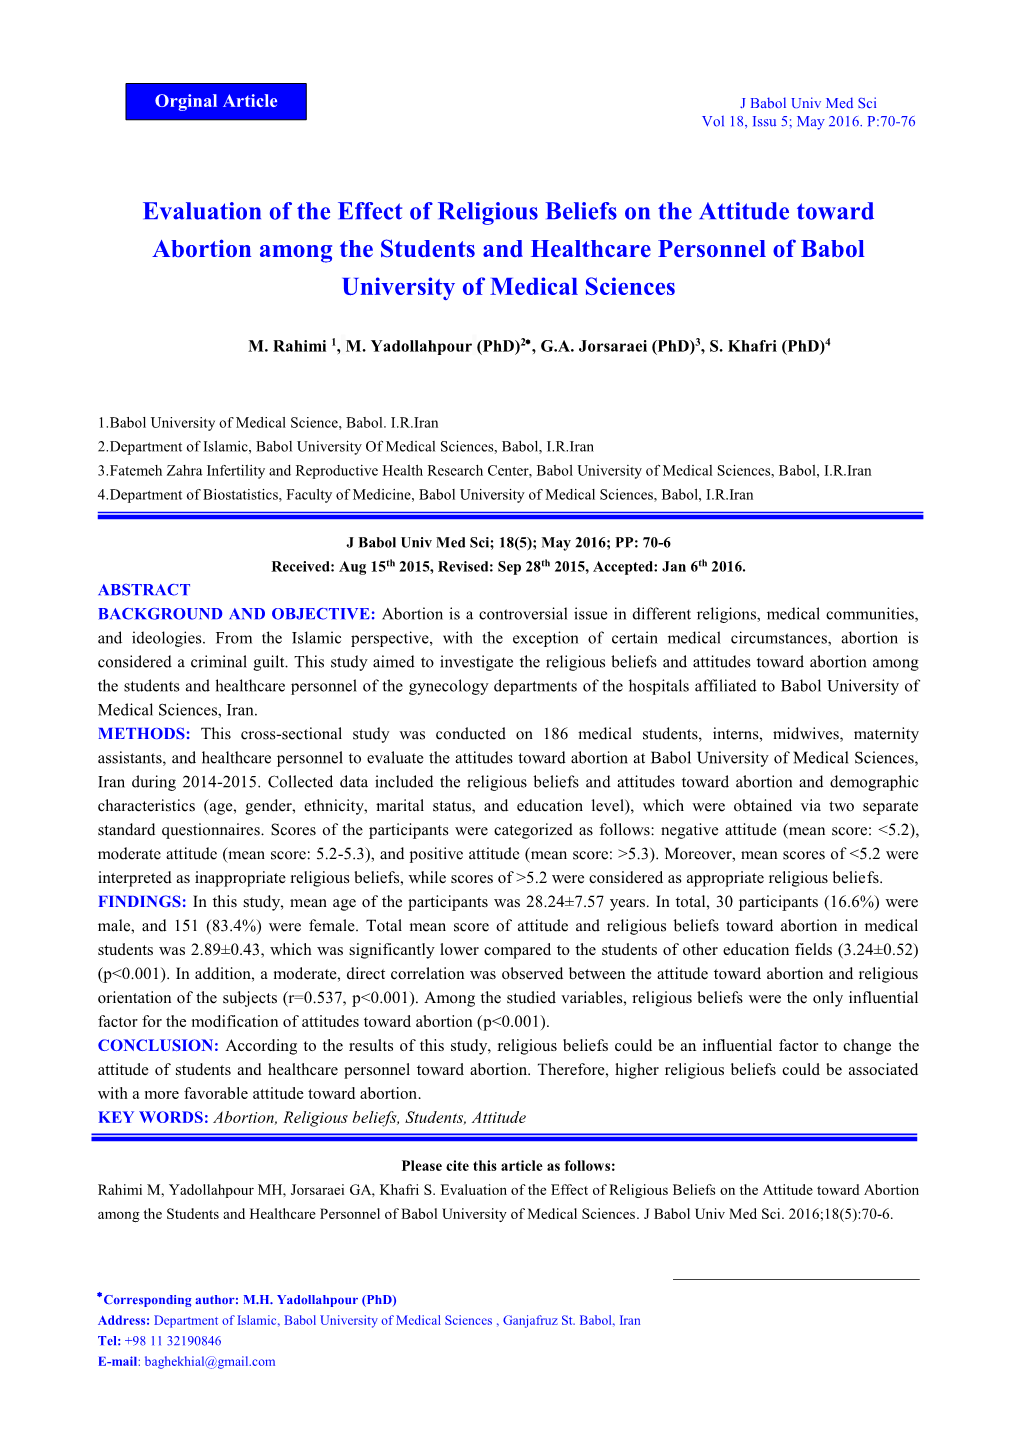 Evaluation of the Effect of Religious Beliefs on the Attitude Toward Abortion Among the Students and Healthcare Personnel of Babol University of Medical Sciences